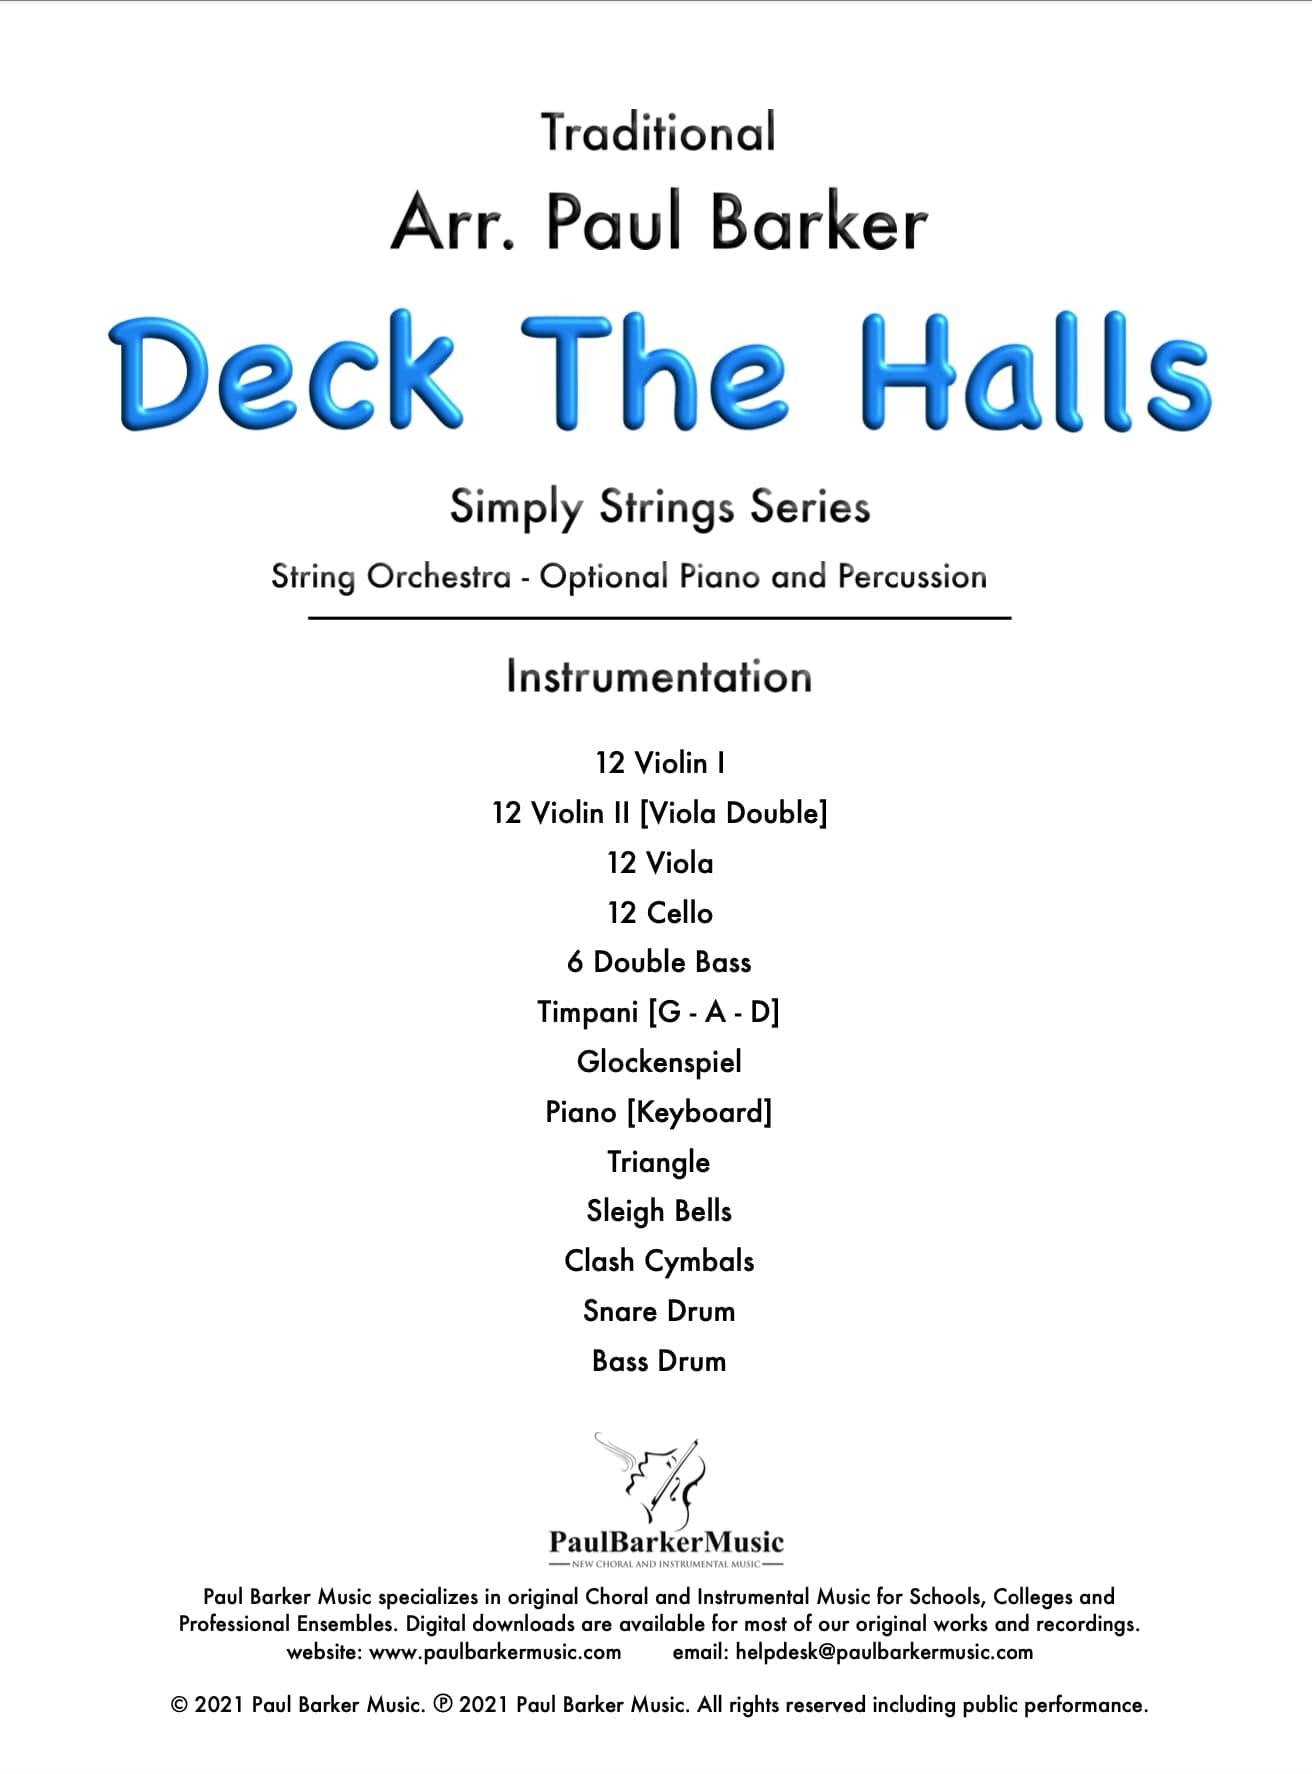 Deck The Halls (String Orchestra) - Paul Barker Music 